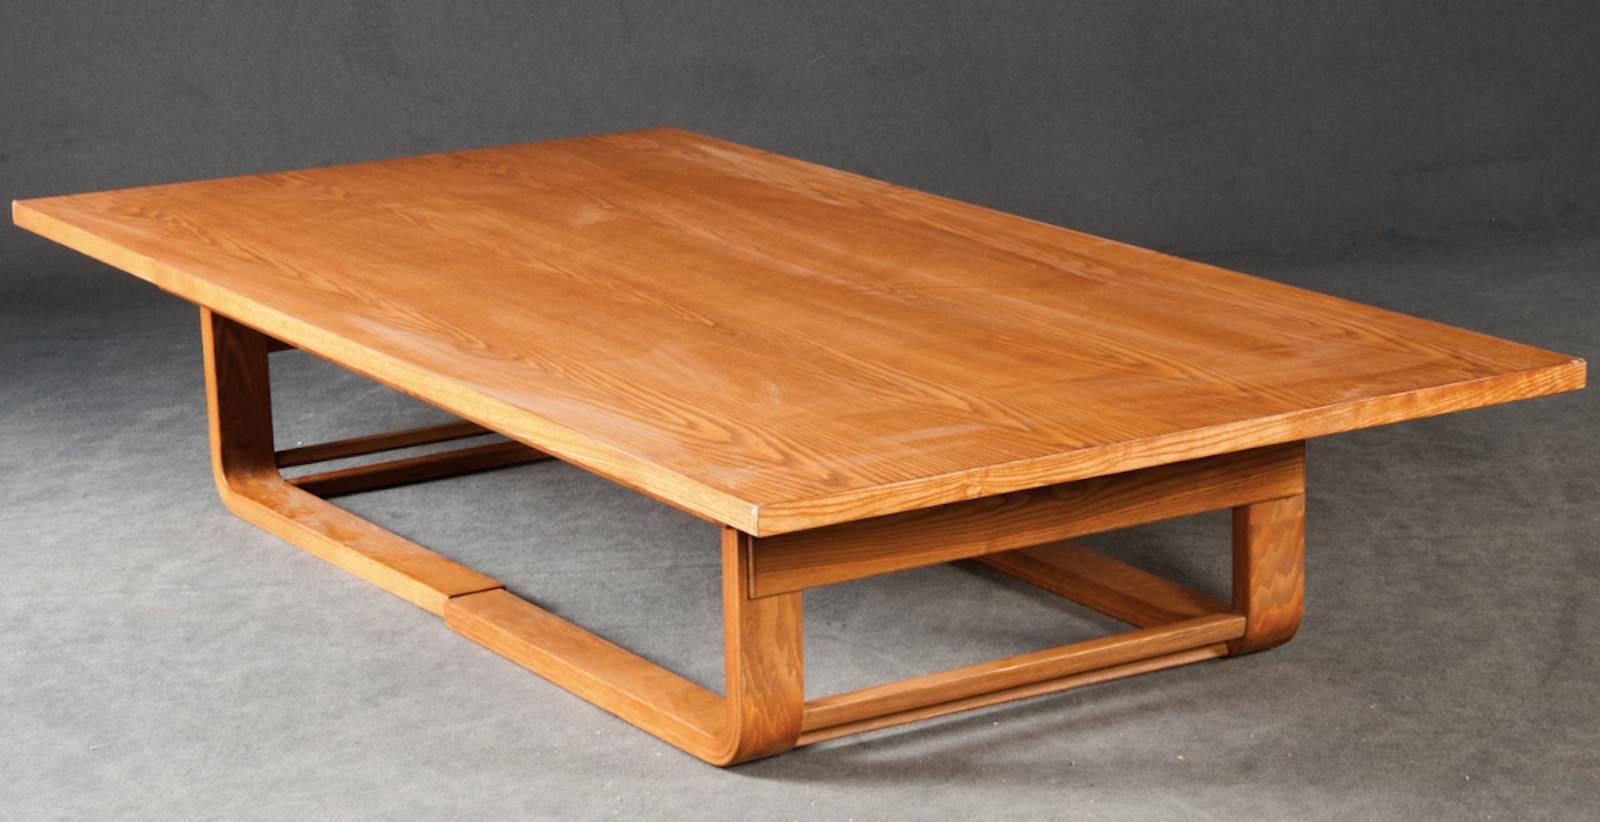 Originally designed by Richard Neutra in 1951. Of the many pieces of furniture Neutra designed for his modernist homes, the Camel table stands, kneels, and sits alone as one of the most functional and attractive. 1980s re-edition by Prospettive.